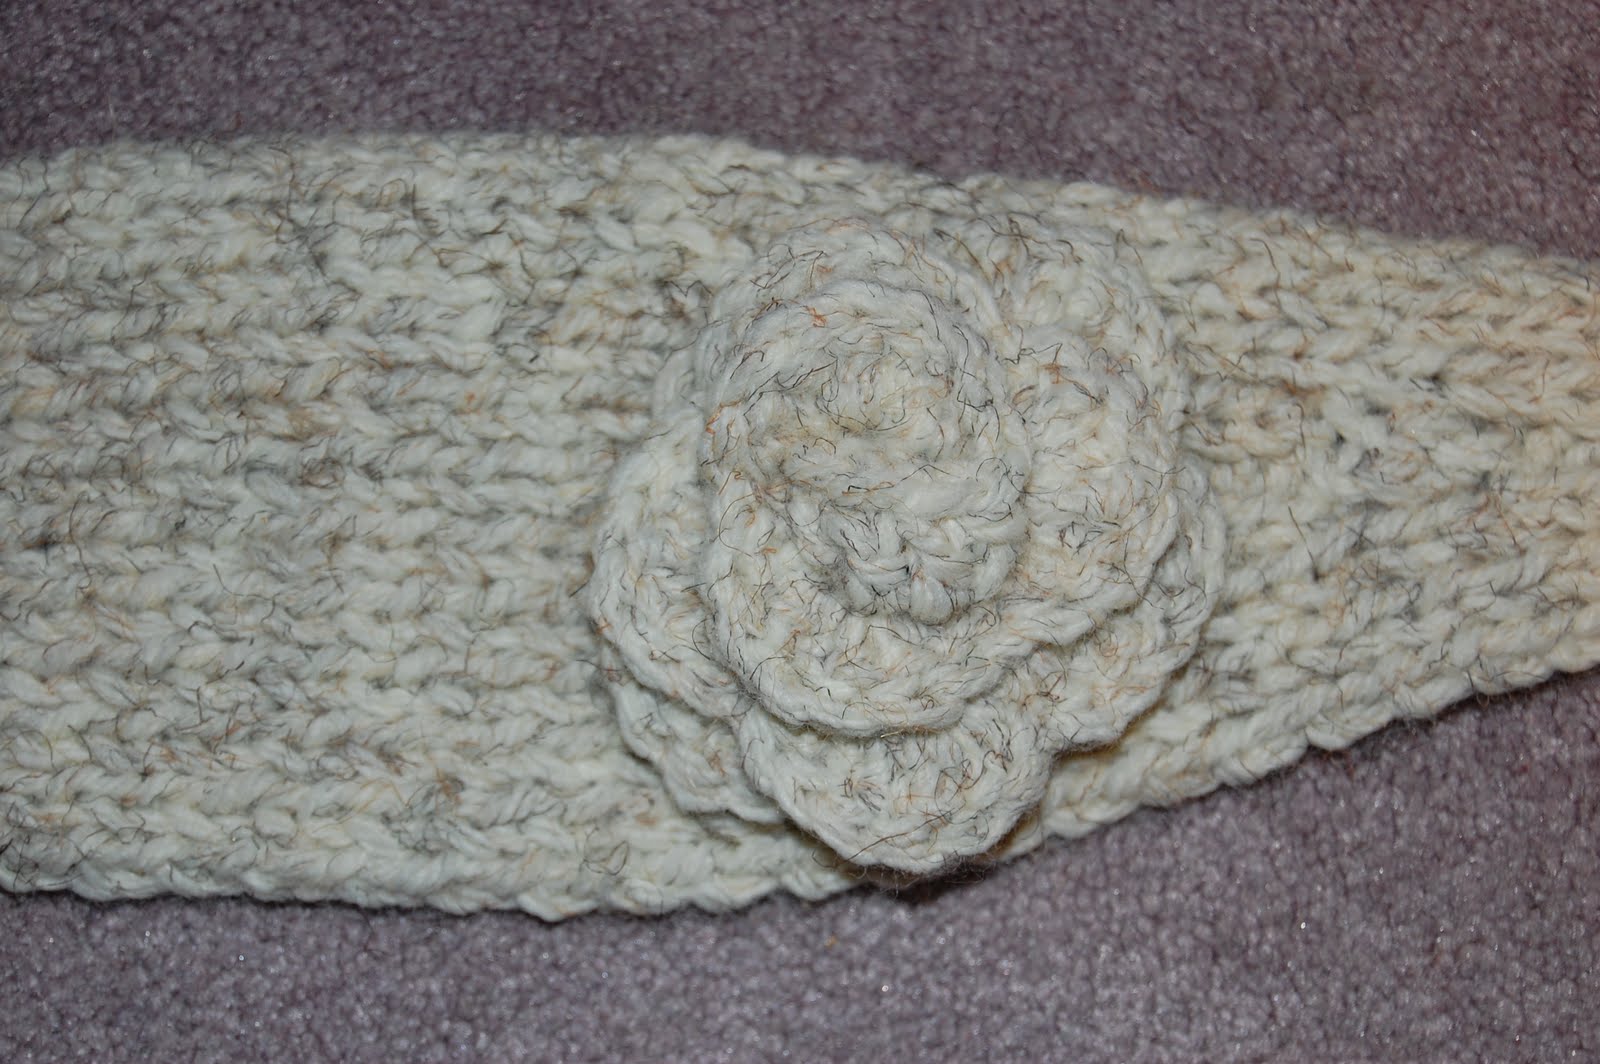 CROCHET PATTERN THREE FLOWERS HAT INCLUDES 5 SIZES FROM NEWBORN TO